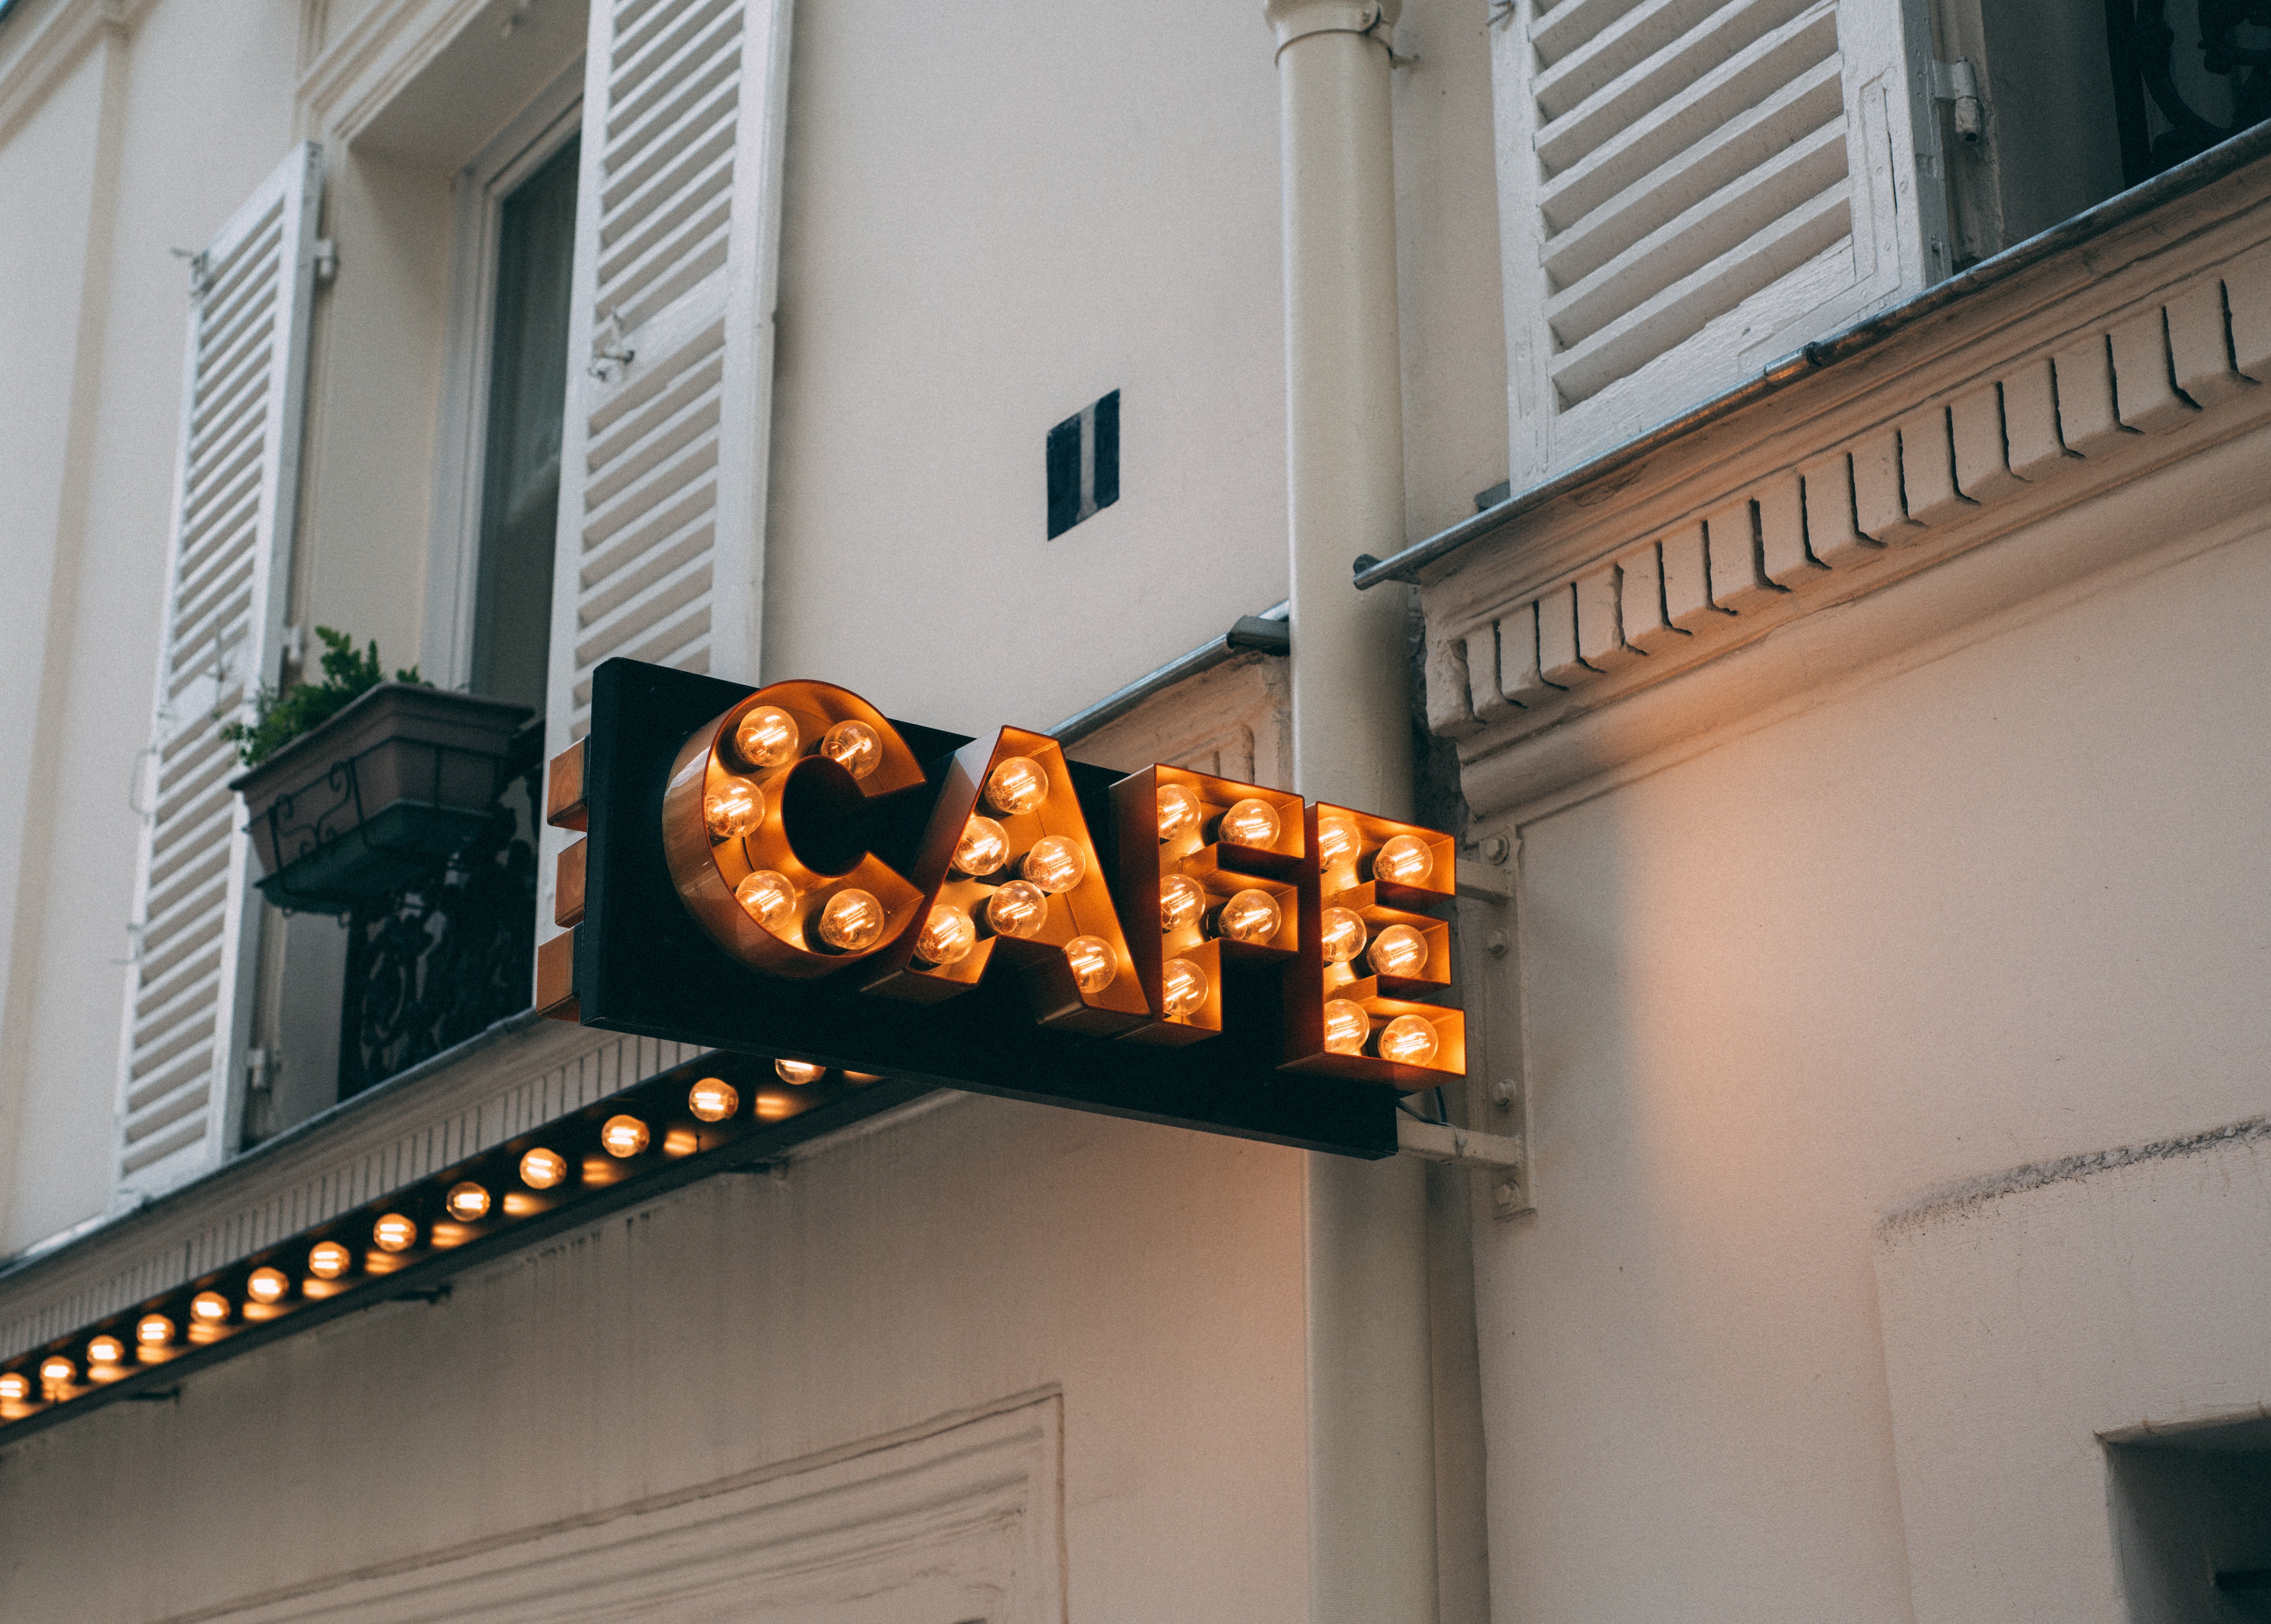 Caleb's cafe was once popular, until competitors started popping up in nearby spaces. | Source: Pexels